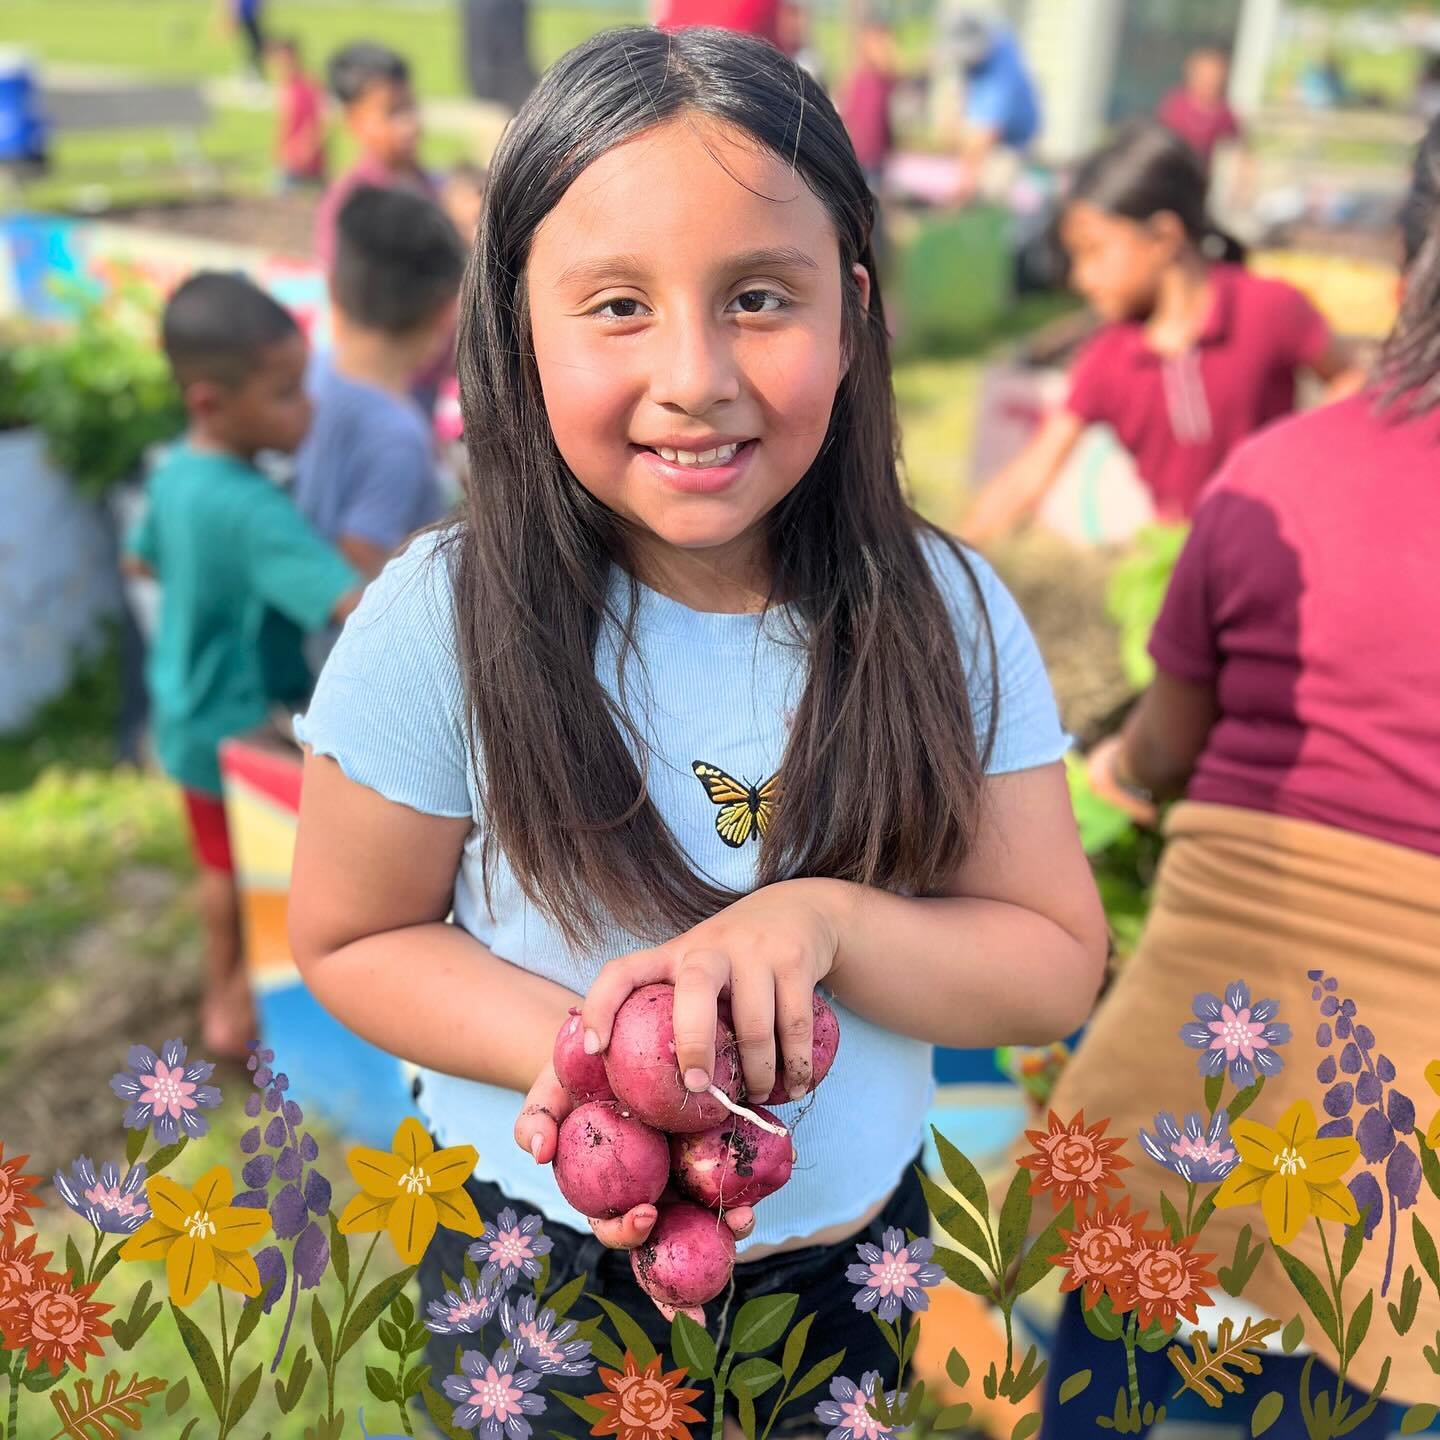 Spring Harvest! 🥔🌱🍠

Yesterday afternoon we harvested potatoes from our garden and planted other yummy veggies! 

⏰Join us on May 6th at 4:30 PM for our next garden day! @fullnessfarm has some exciting new additions for us! 💚 #GardereProud #commu